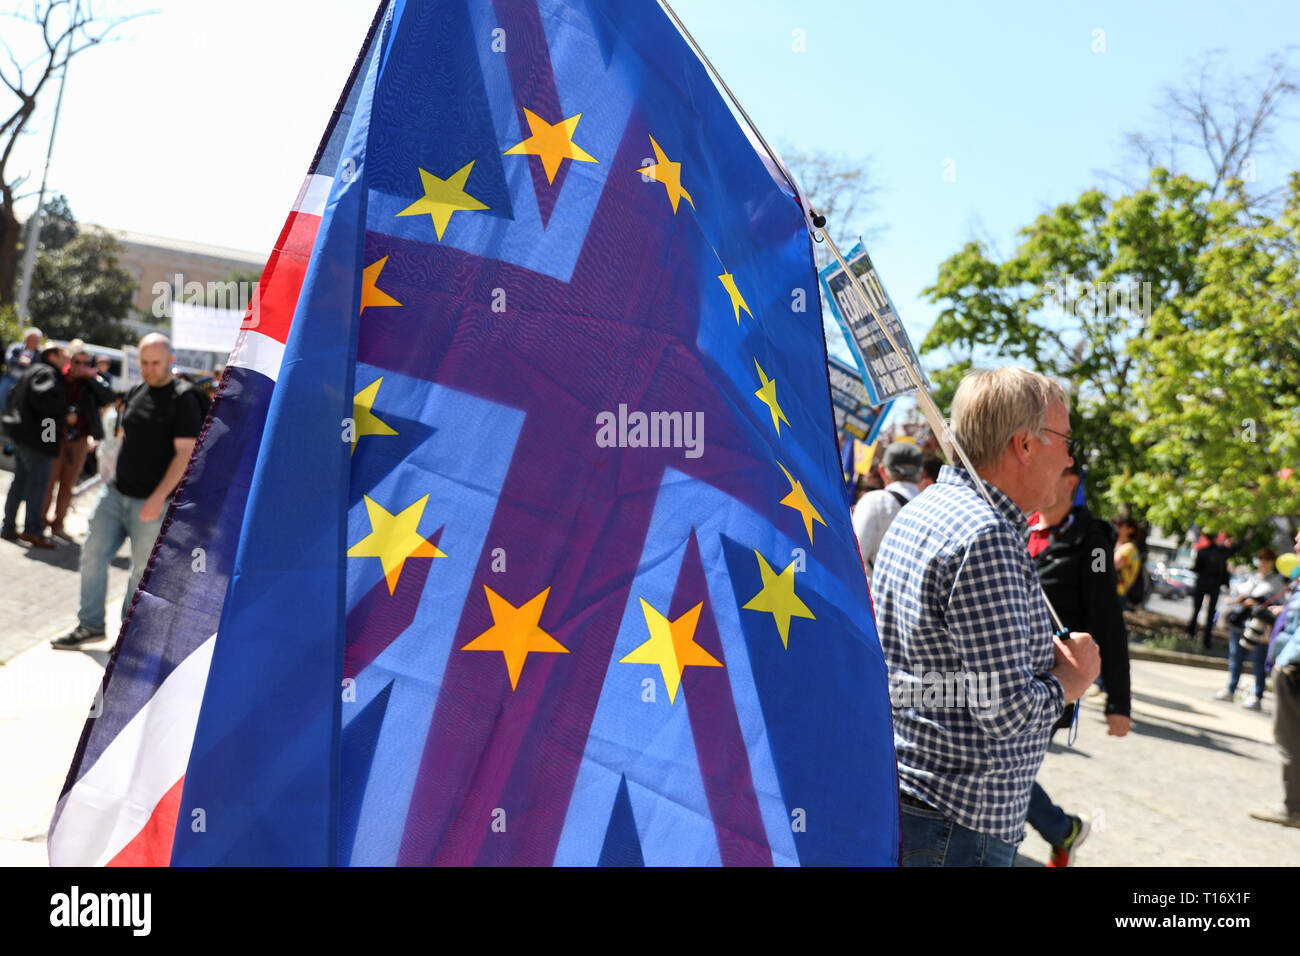 A participant seen with flags of England and Europe during the demonstration. The British community in Spain demonstrated in favor of another referendum on Brexit at Plaza de Colón 'in defense of the rights of the five million Europeans in the United Kingdom and British in the European Union and to request a second referendum on the exit of Great Britain from the EU '. Stock Photo